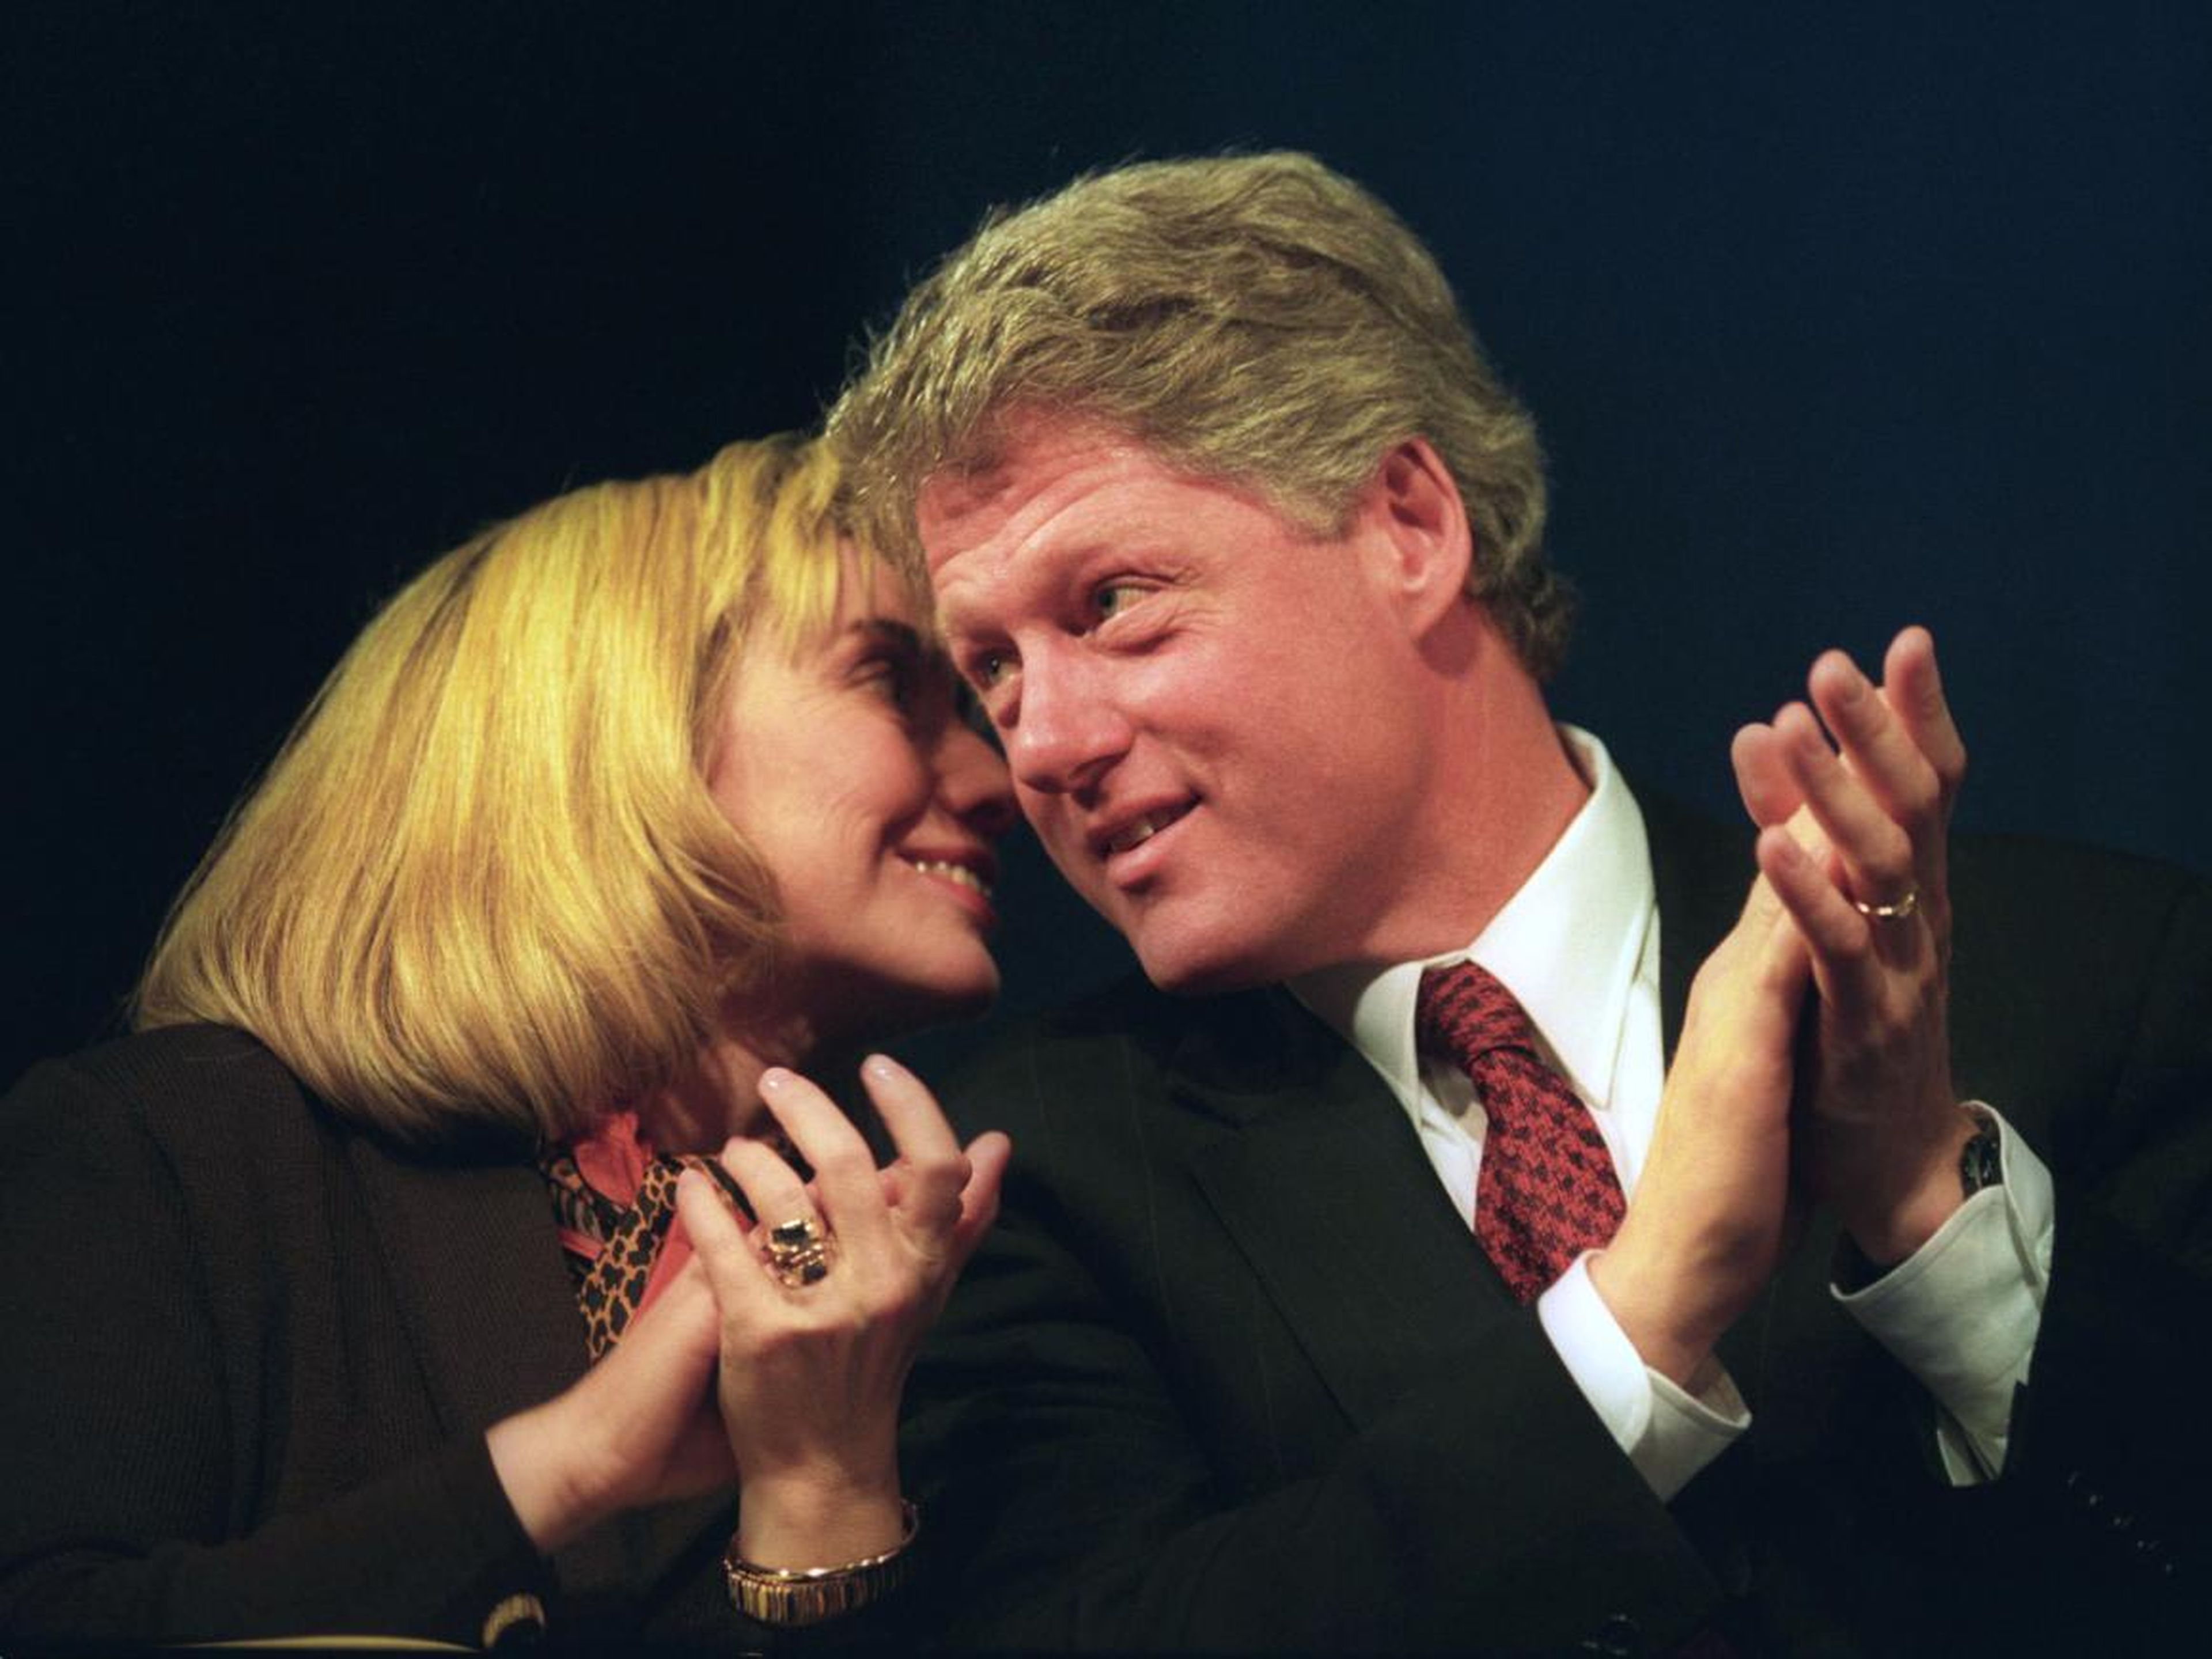 Hillary Clinton and Bill Clinton looked energetic at a dinner in 1993 several days before his first inauguration.